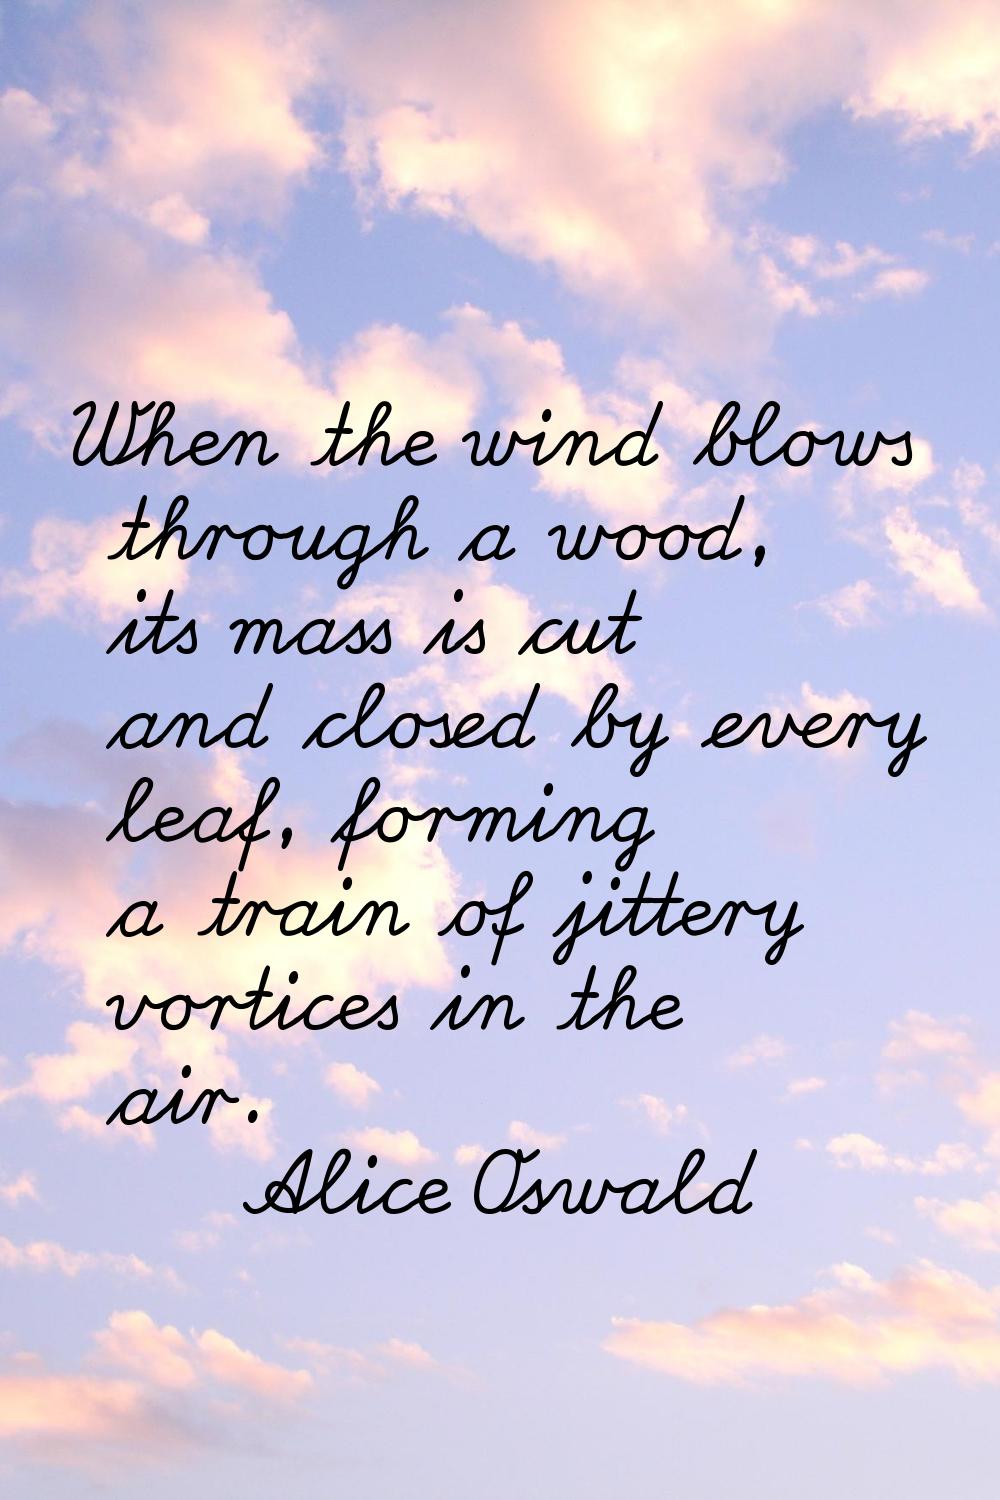 When the wind blows through a wood, its mass is cut and closed by every leaf, forming a train of ji